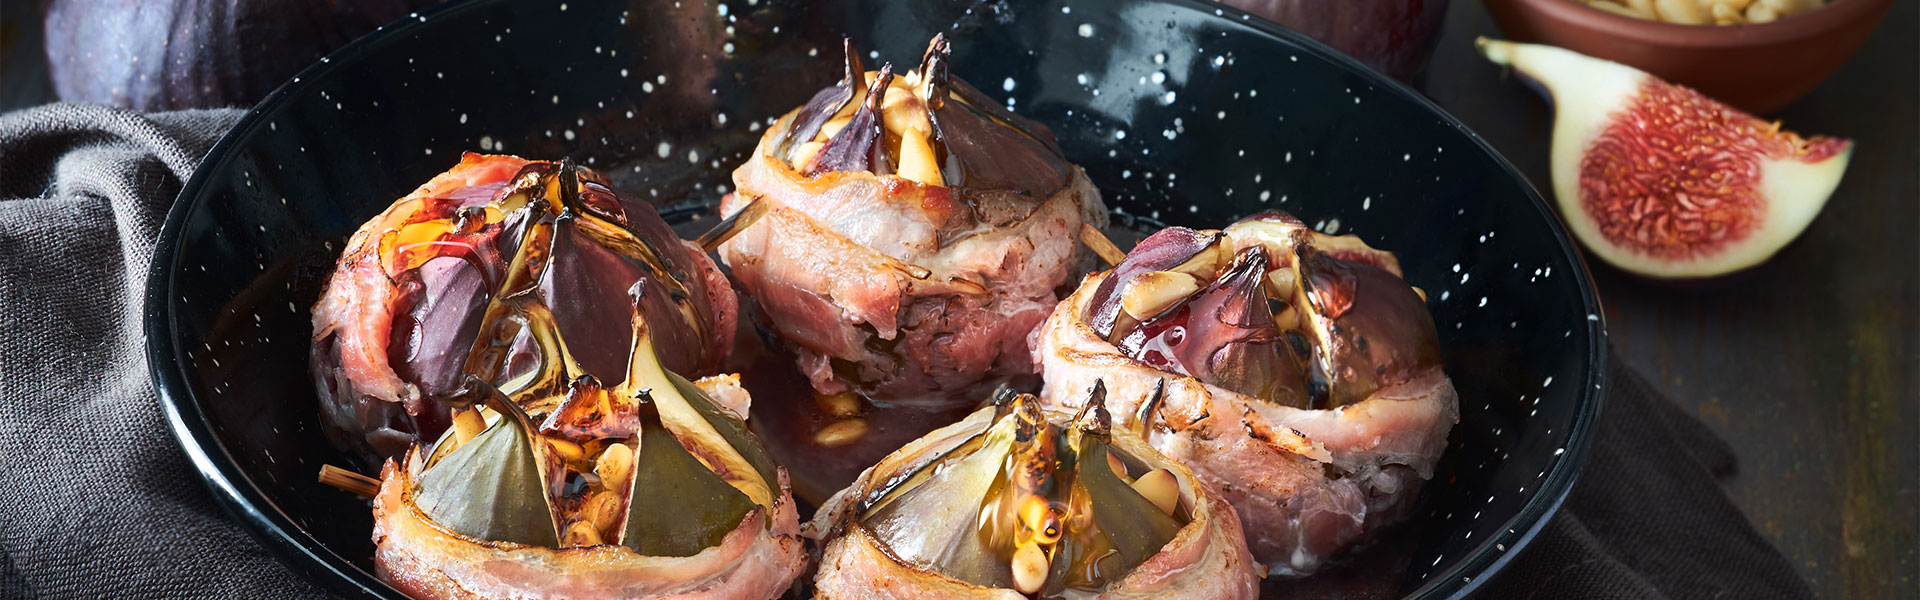 Goat Cheese-Stuffed Figs Wrapped in Prosciutto